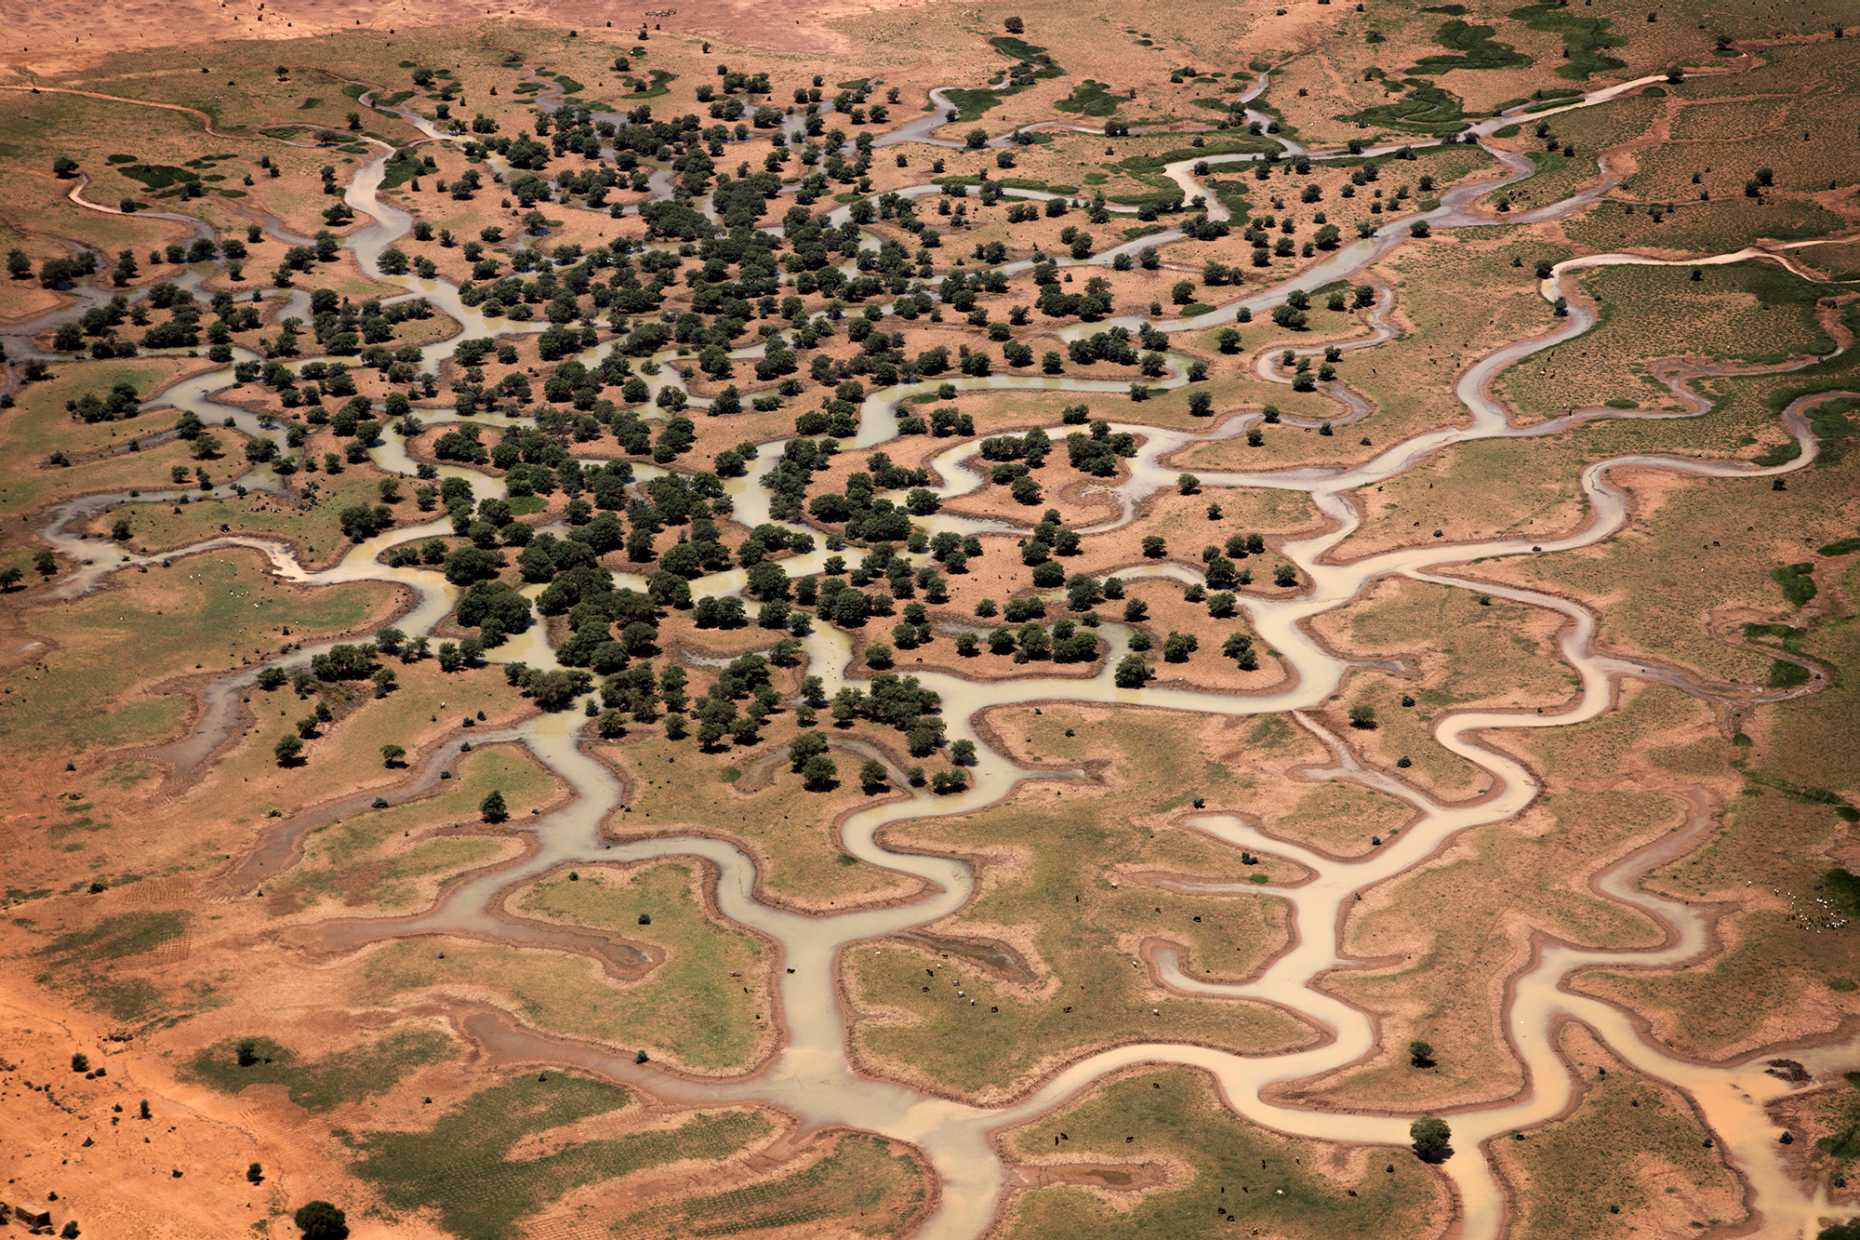 Aerial View of Northern Mali. Photo: UN Photo / Marco Dormino (CC BY-NC-ND 2.0)